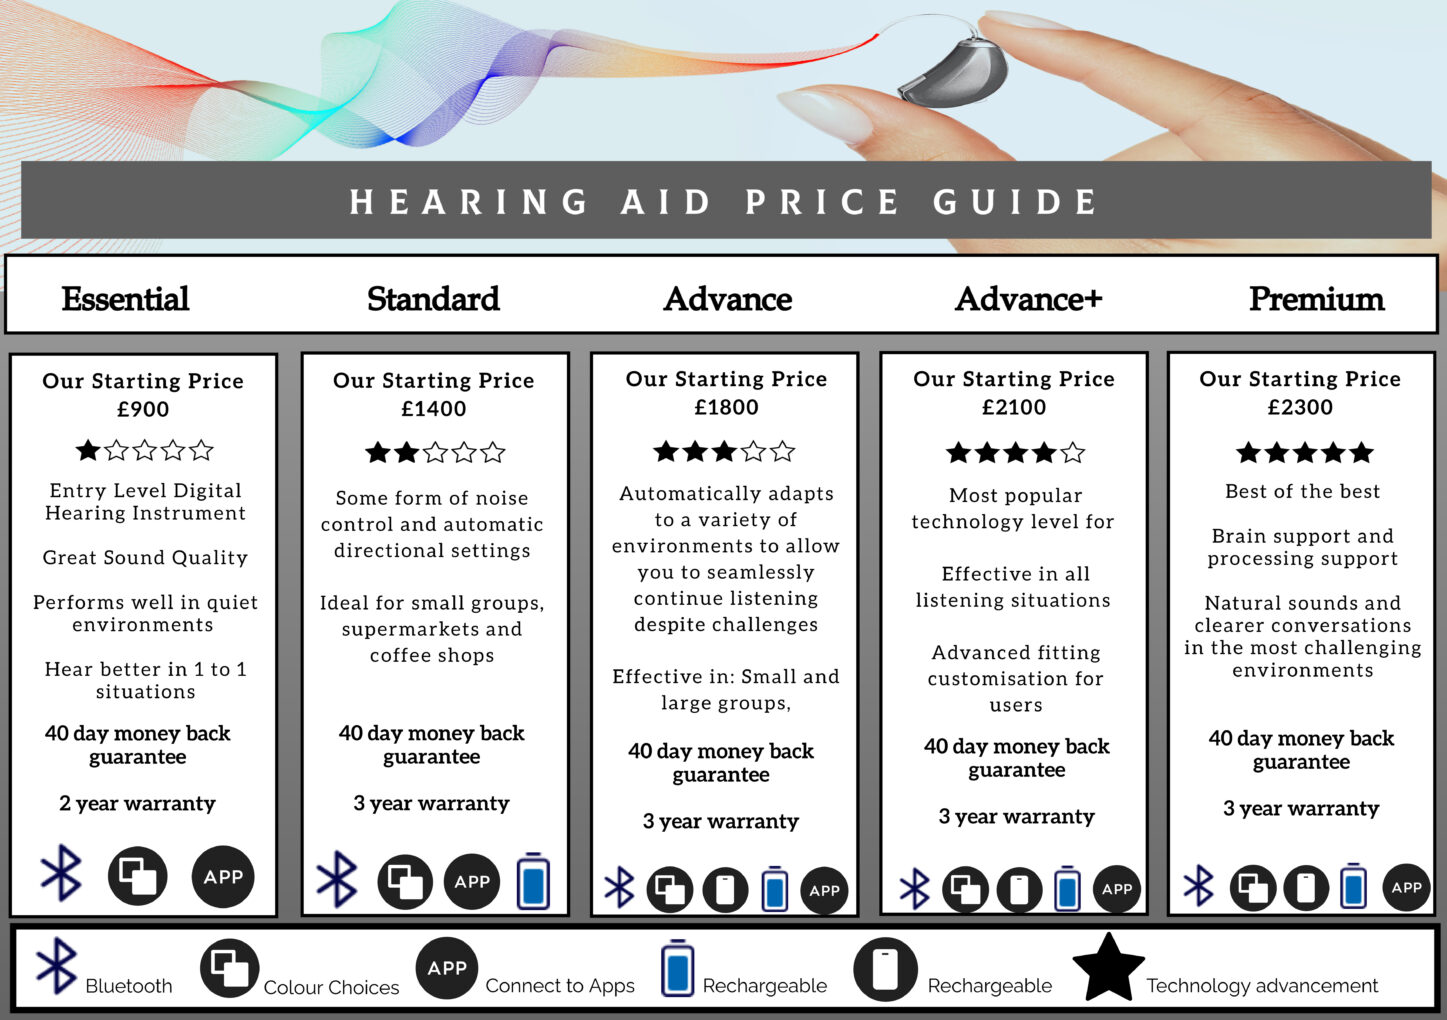 Hearing Aid Price Guideline